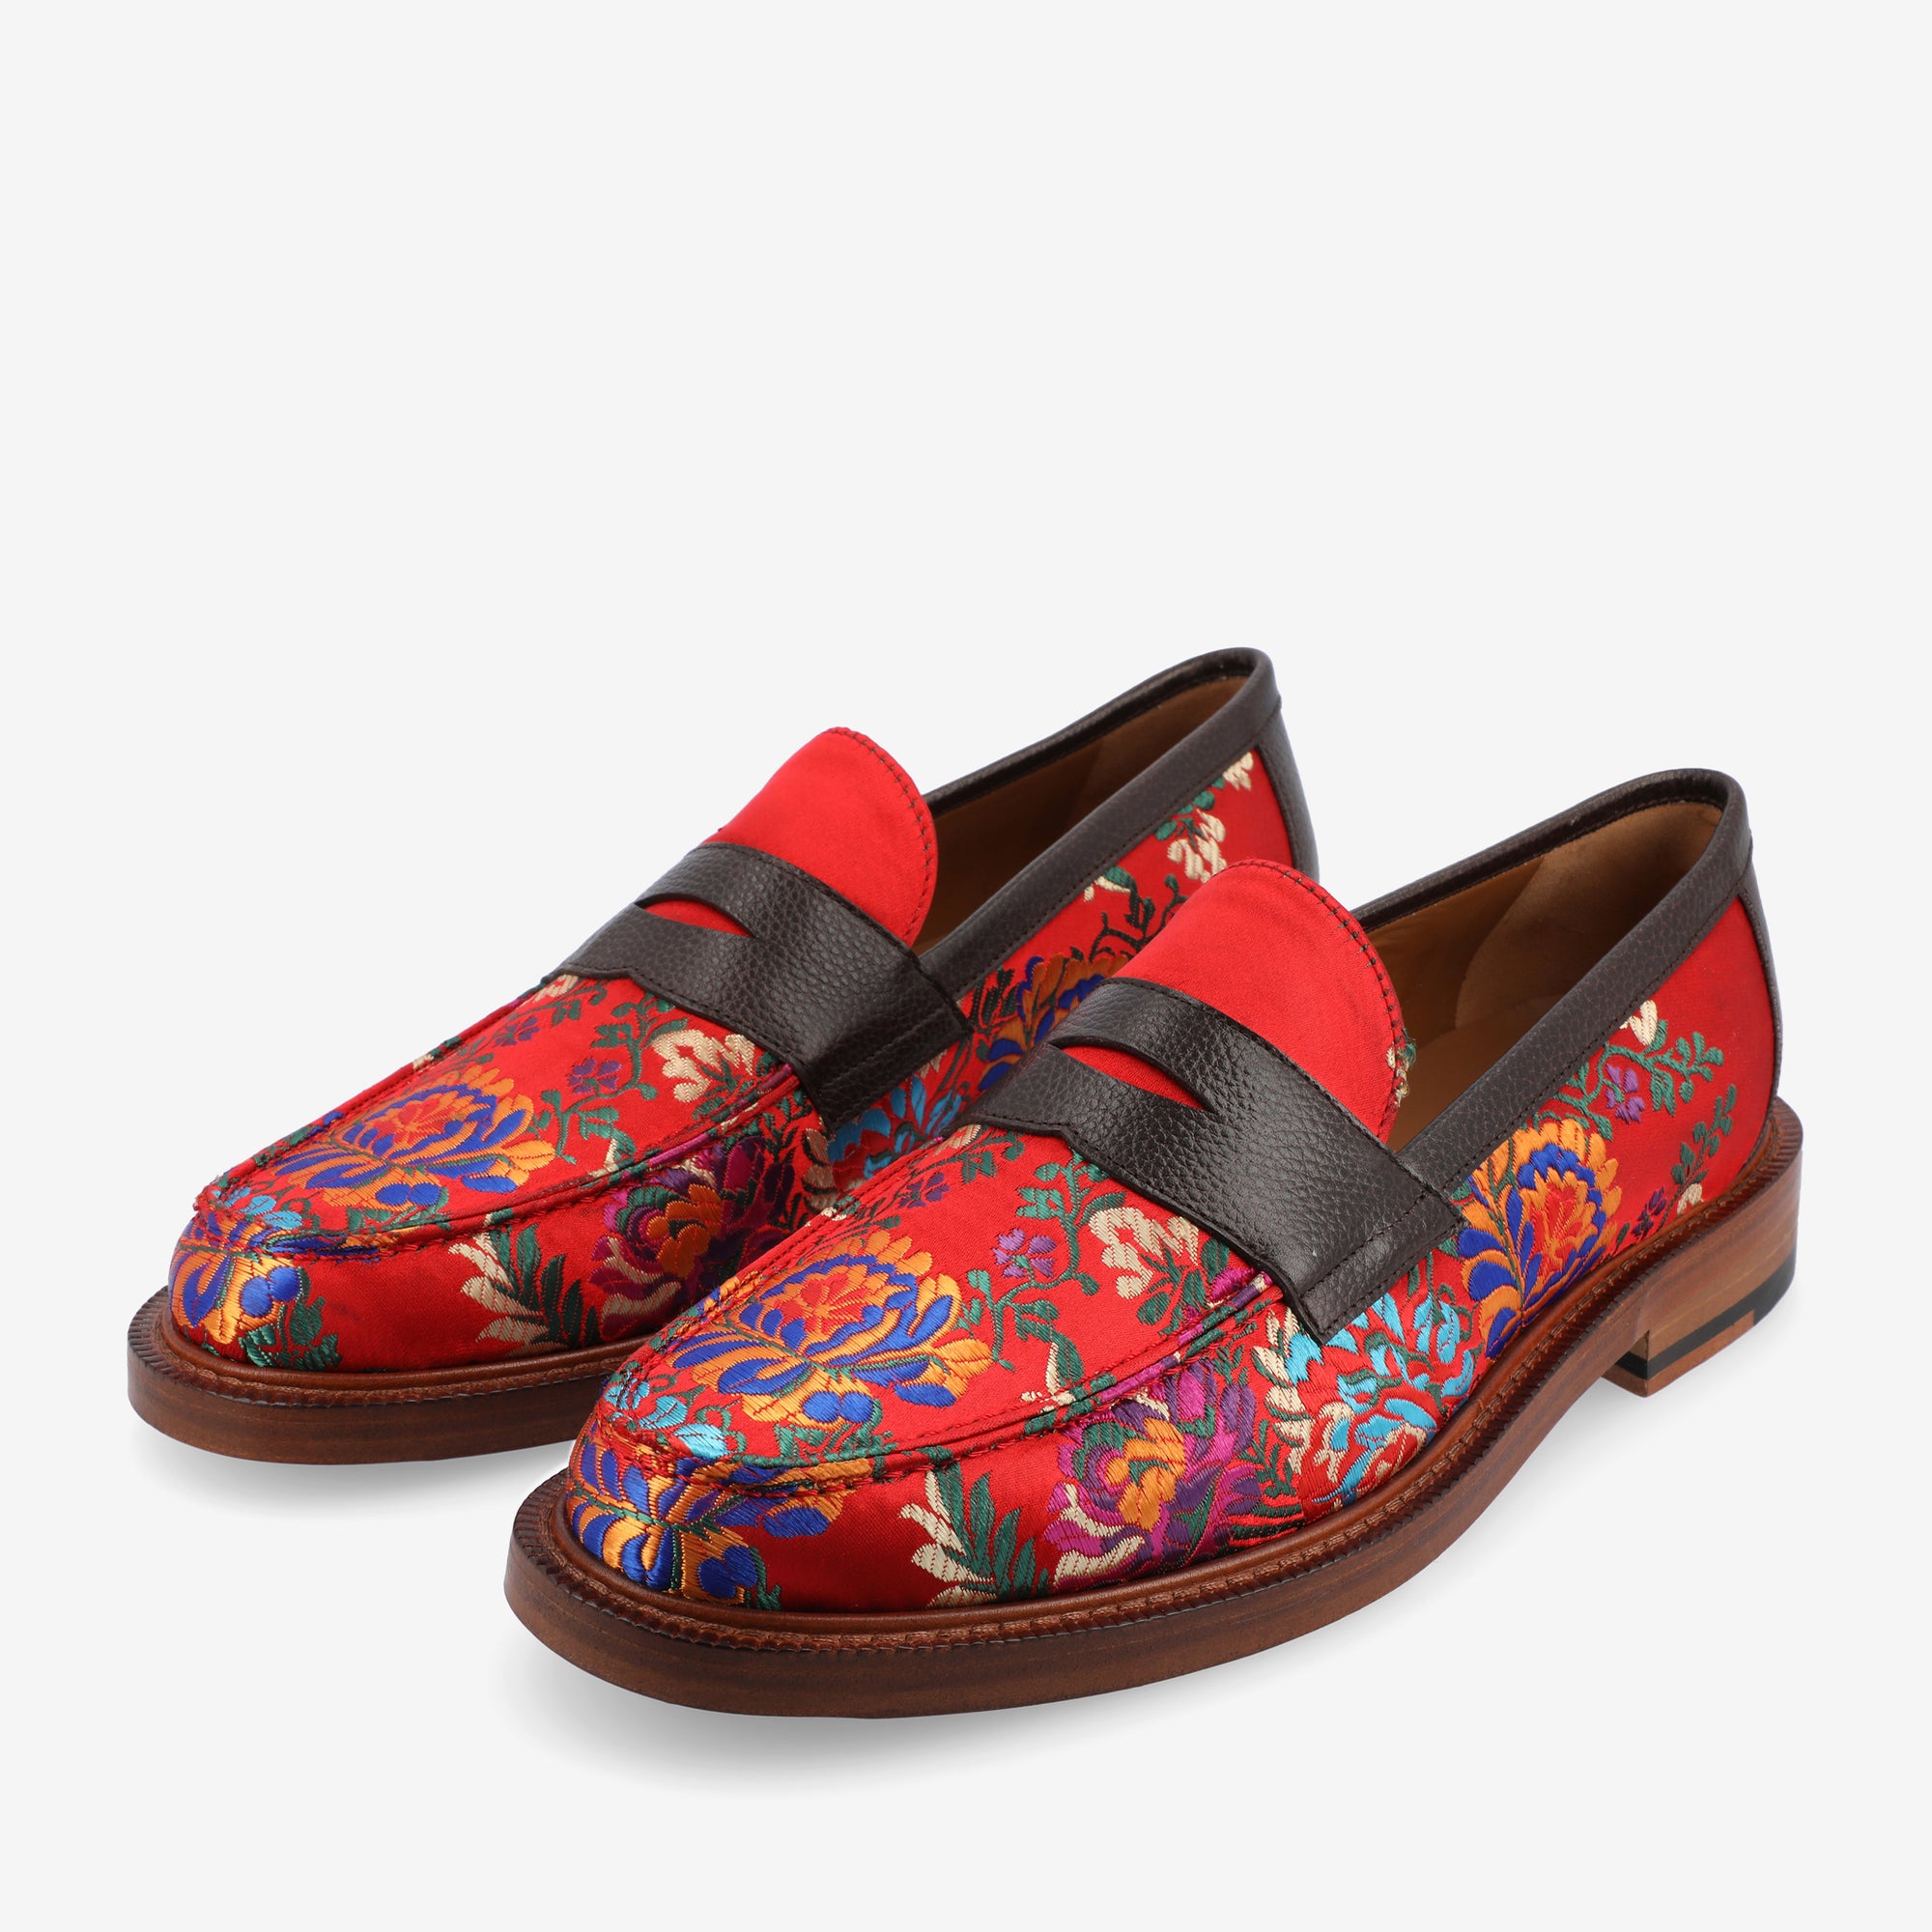 The Fitz Loafer in Fiore